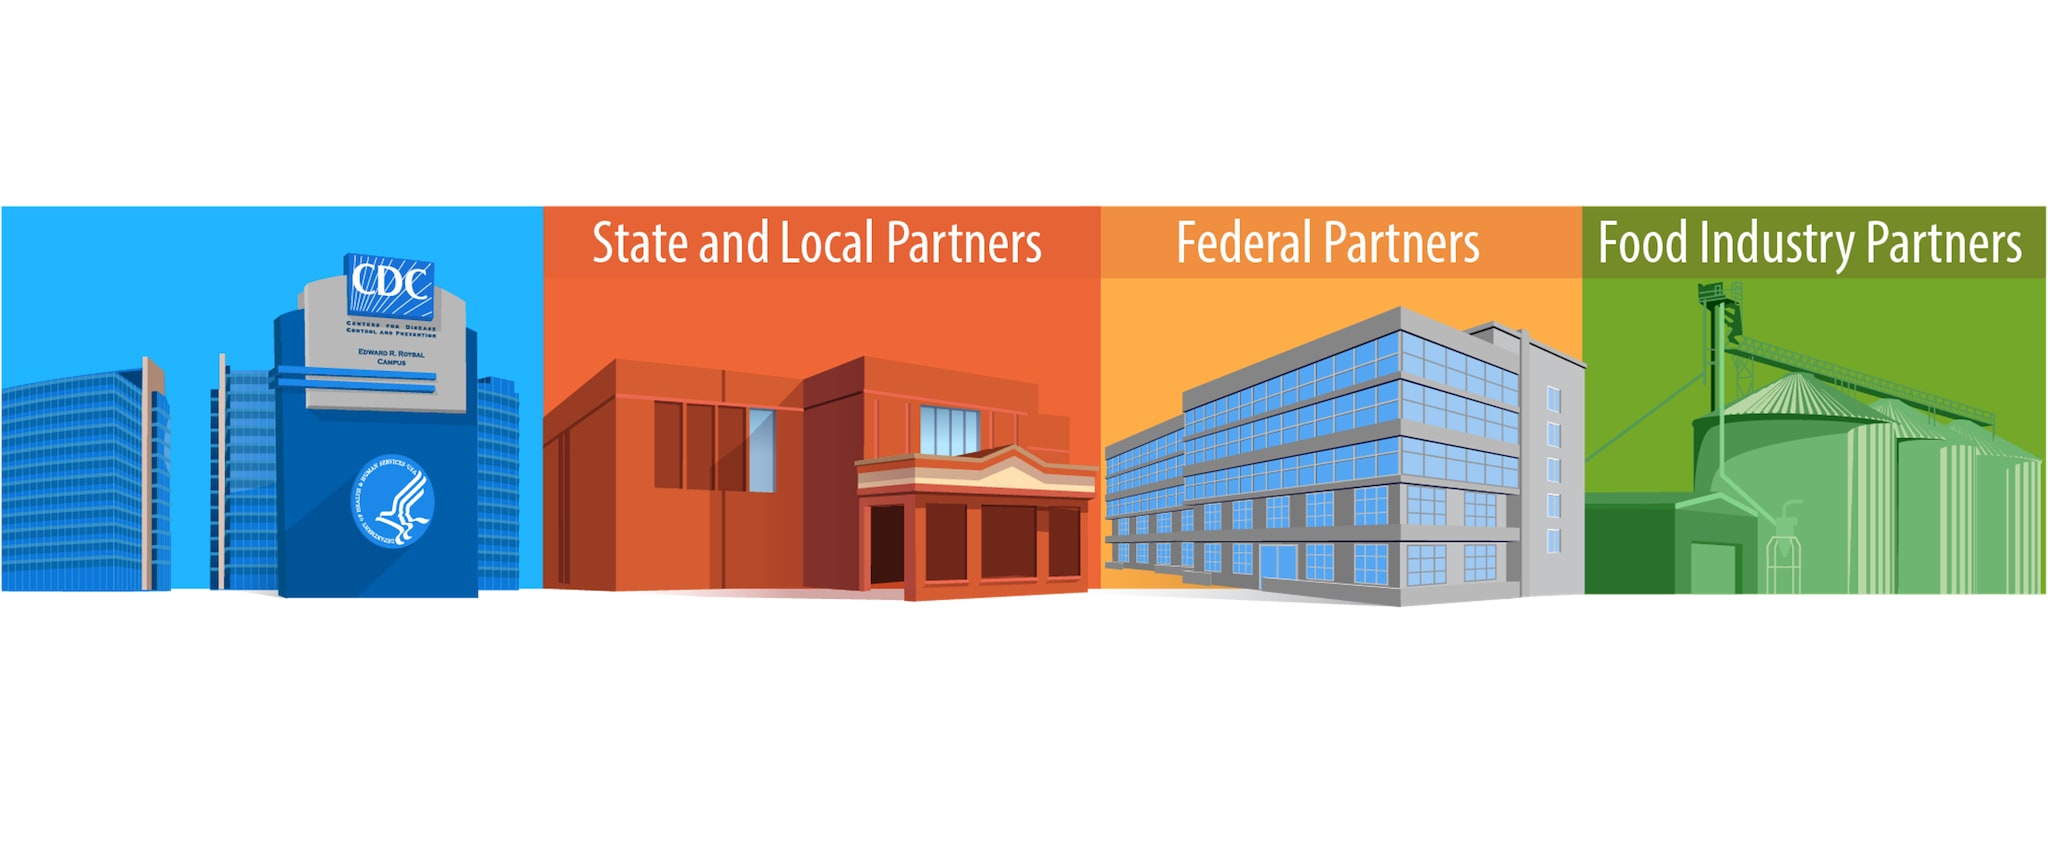 State and Local Partners, Federal Partners, and Food Industry Partners